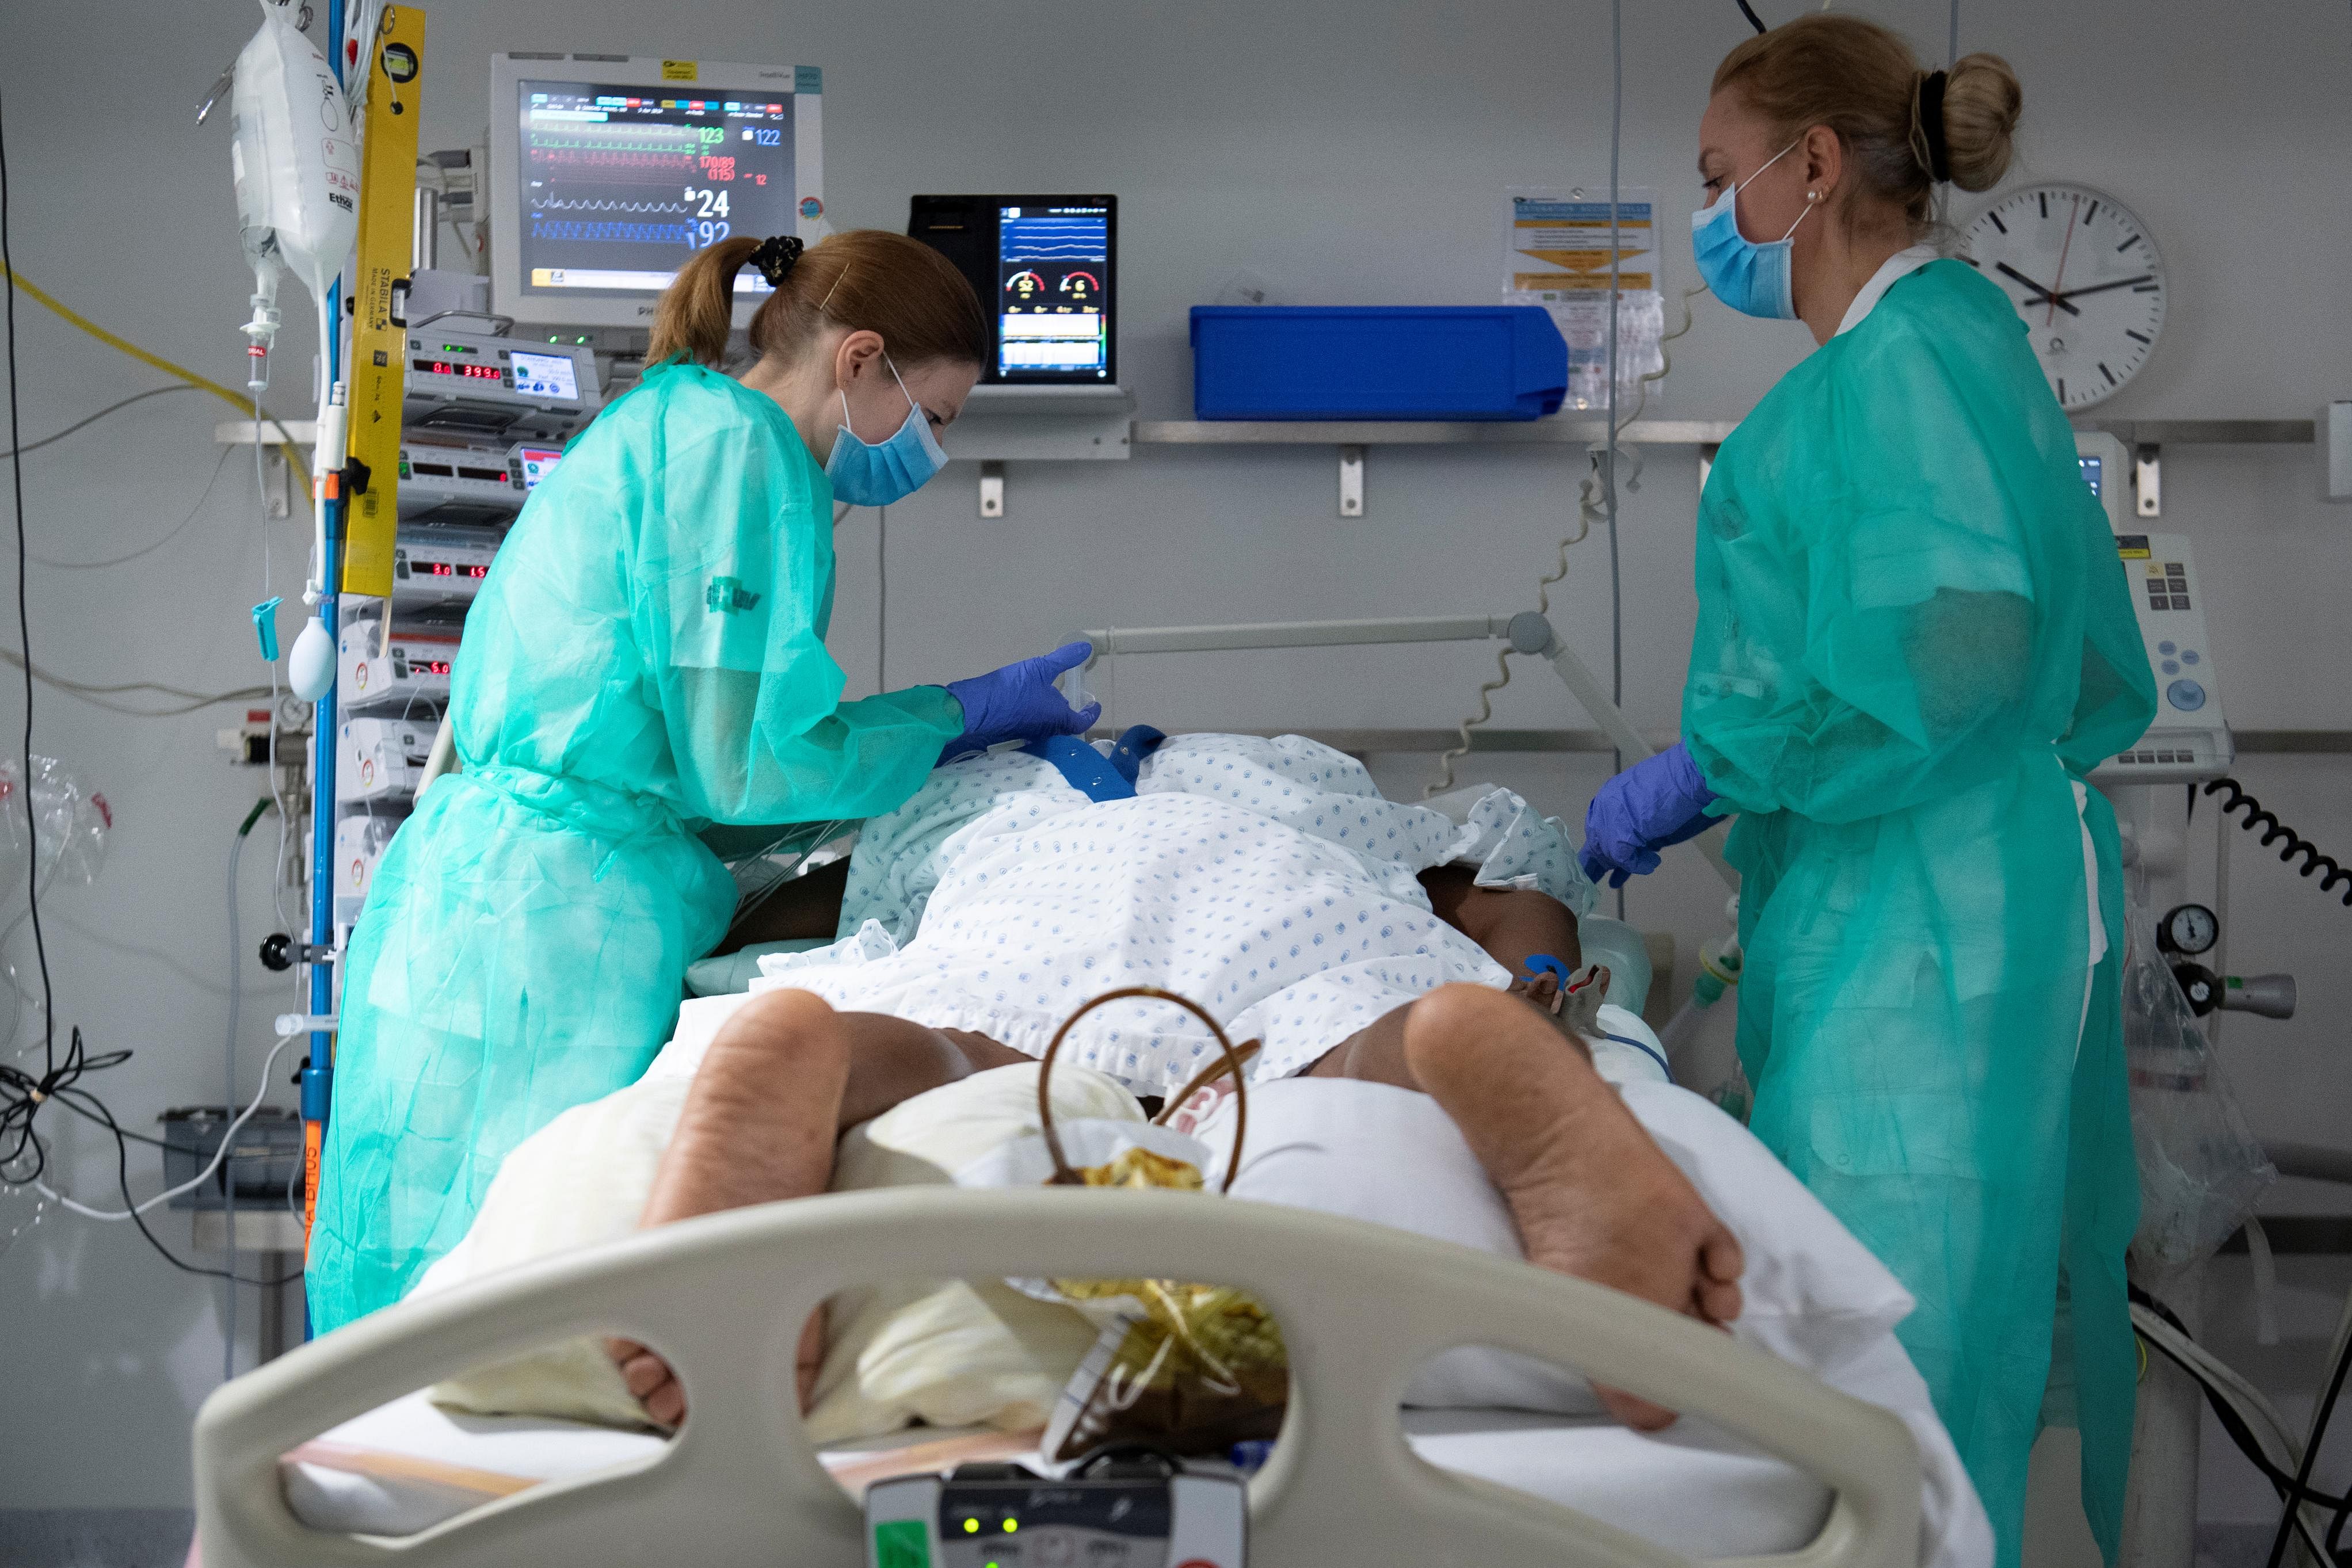 Staff treat a patient in the intensive care unit at the University Hospital (CHUV) during the coronavirus disease (COVID-19) outbreak in Lausanne, Switzerland. (Credit: Reuters)